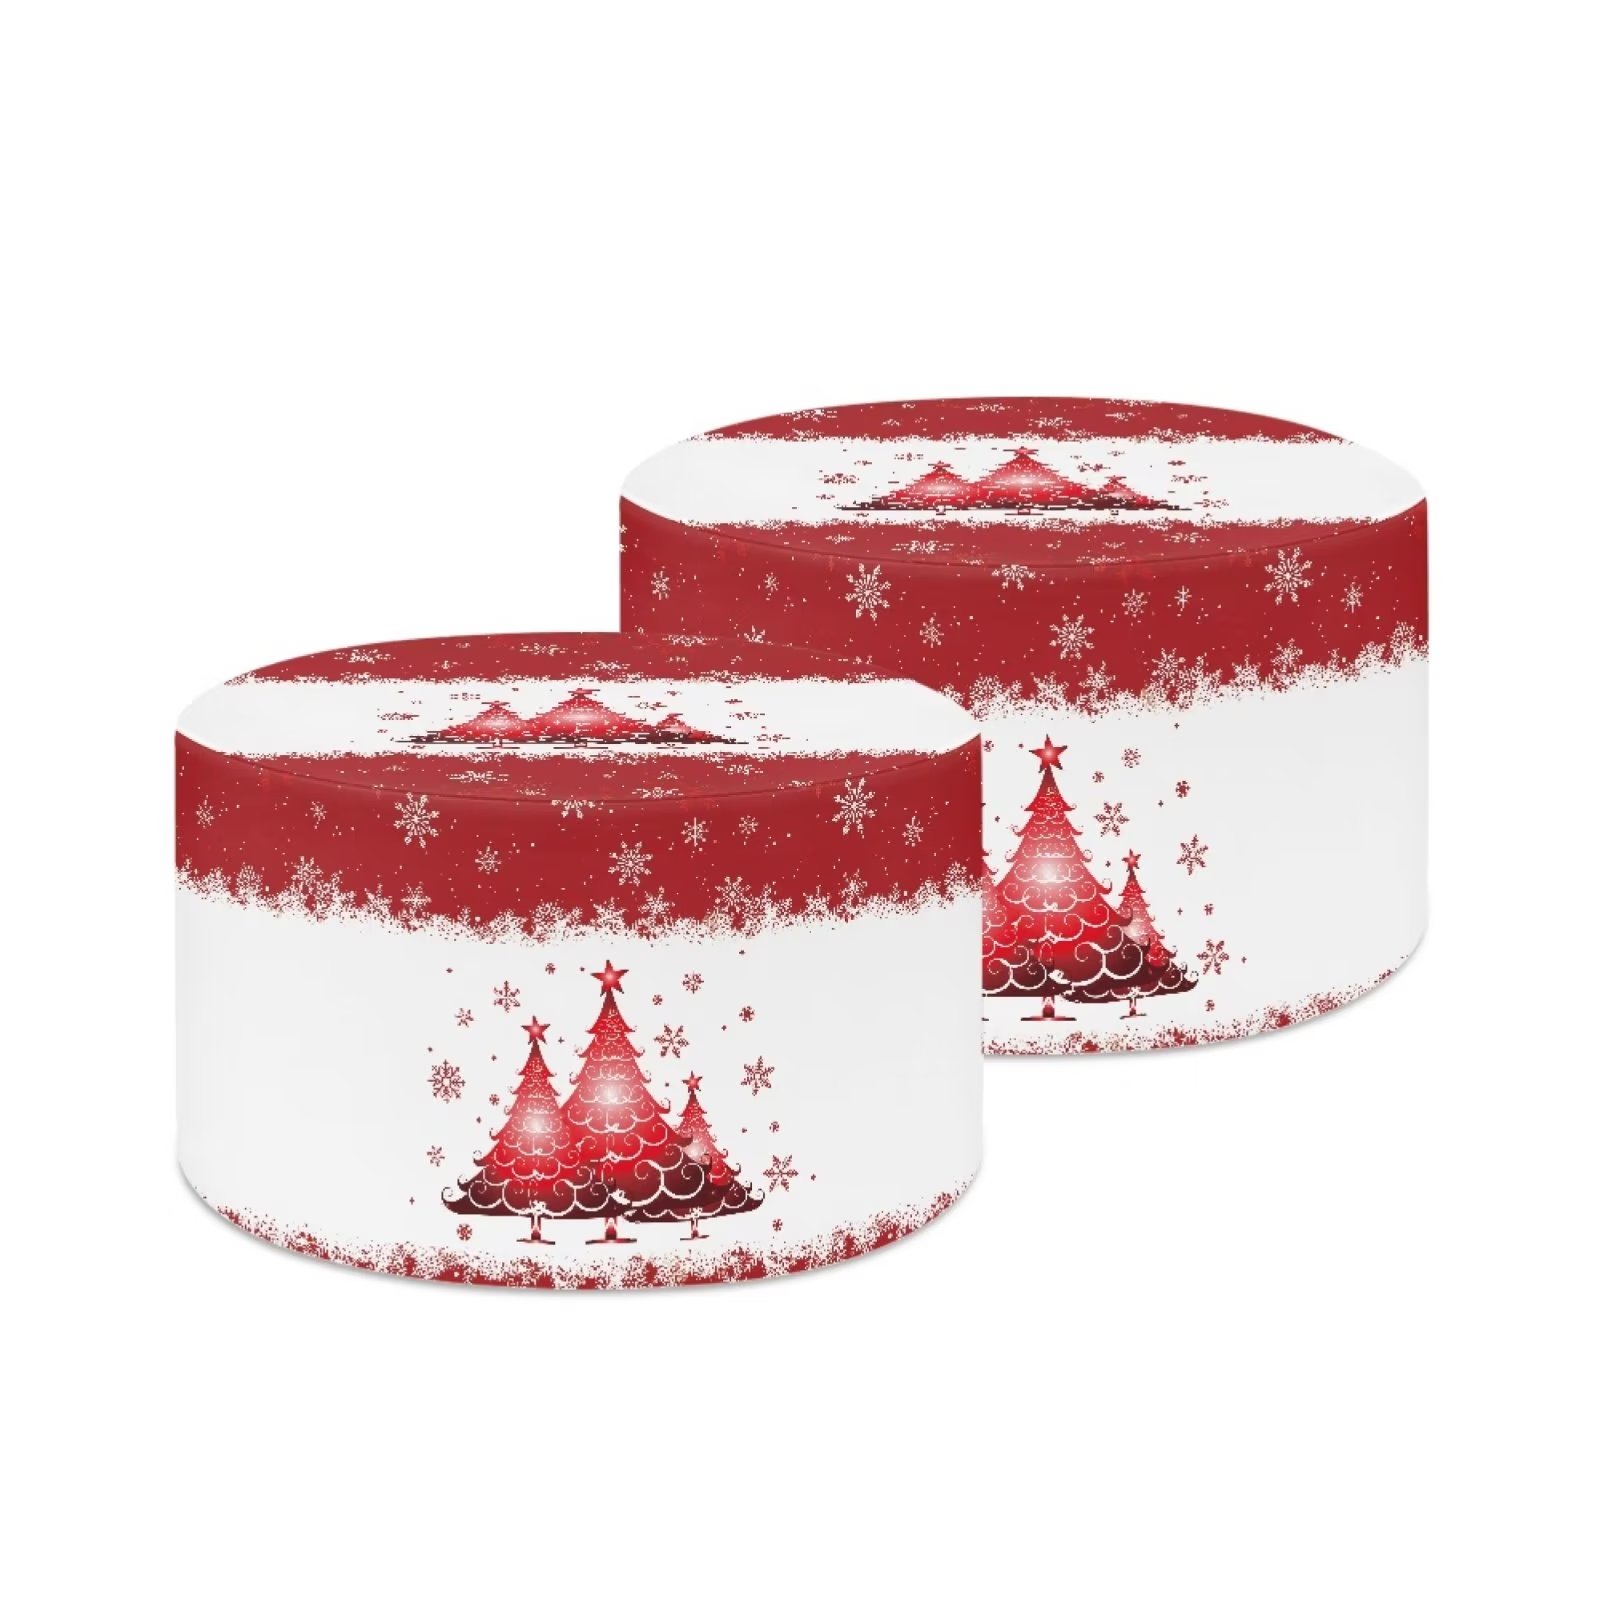 Pzuqiu Christmas Tree Lampshades Set of 2 Barrel Shape Lamp Shade for Bedside Lamp Office Floors Lamp Cylinder PVC Night Light Cover Family Friend Gifts,8.3 Inch Height - image 1 of 8